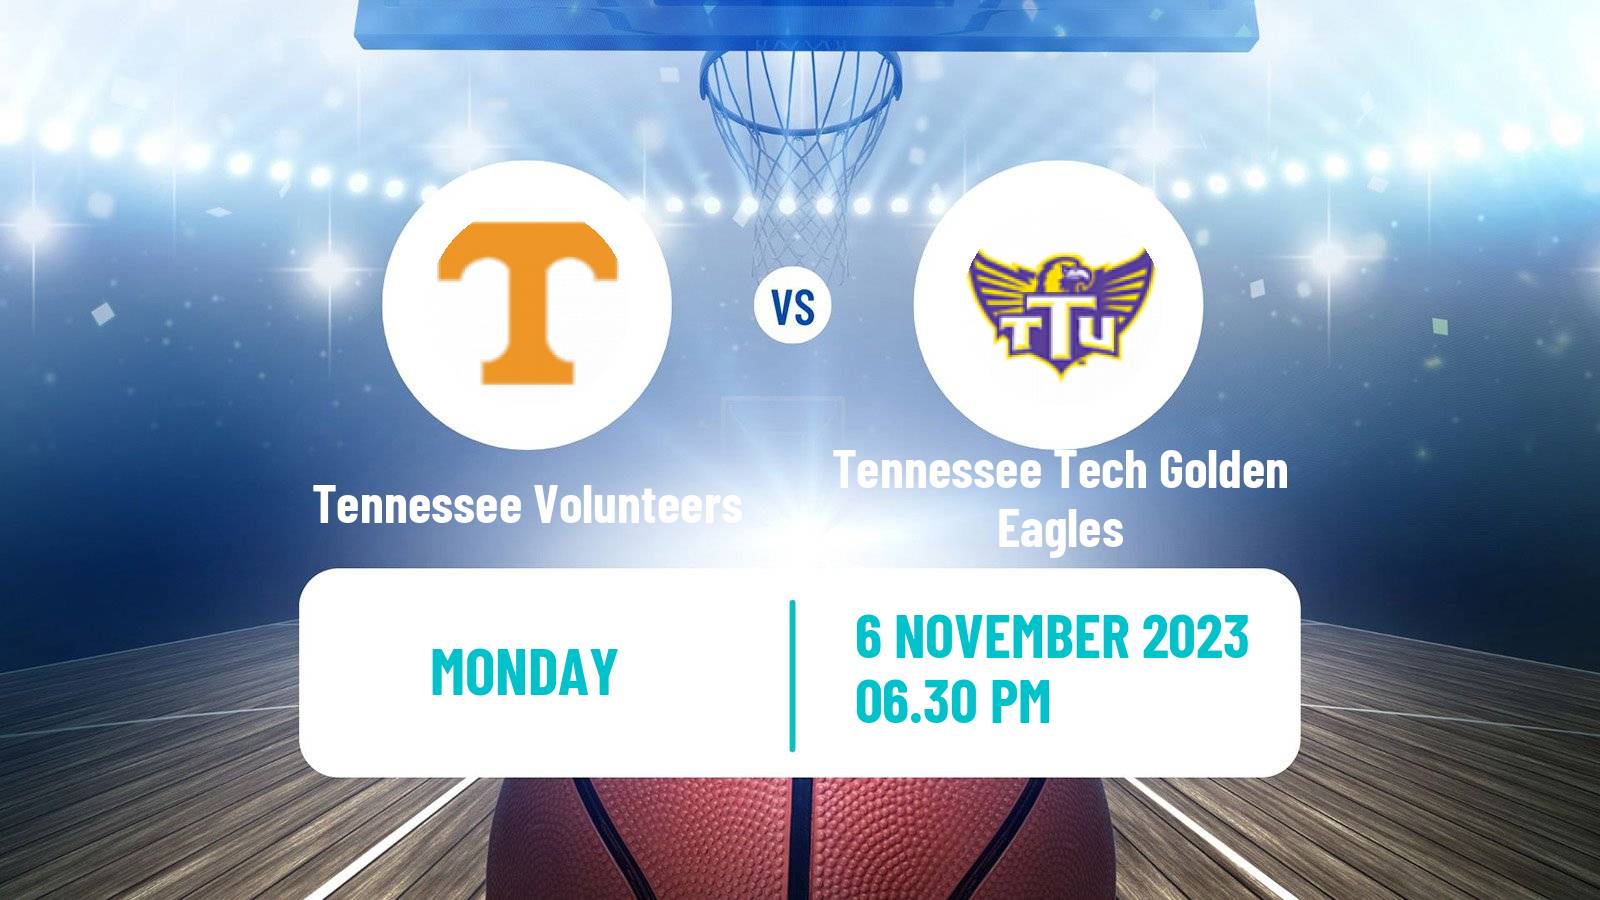 Basketball NCAA College Basketball Tennessee Volunteers - Tennessee Tech Golden Eagles